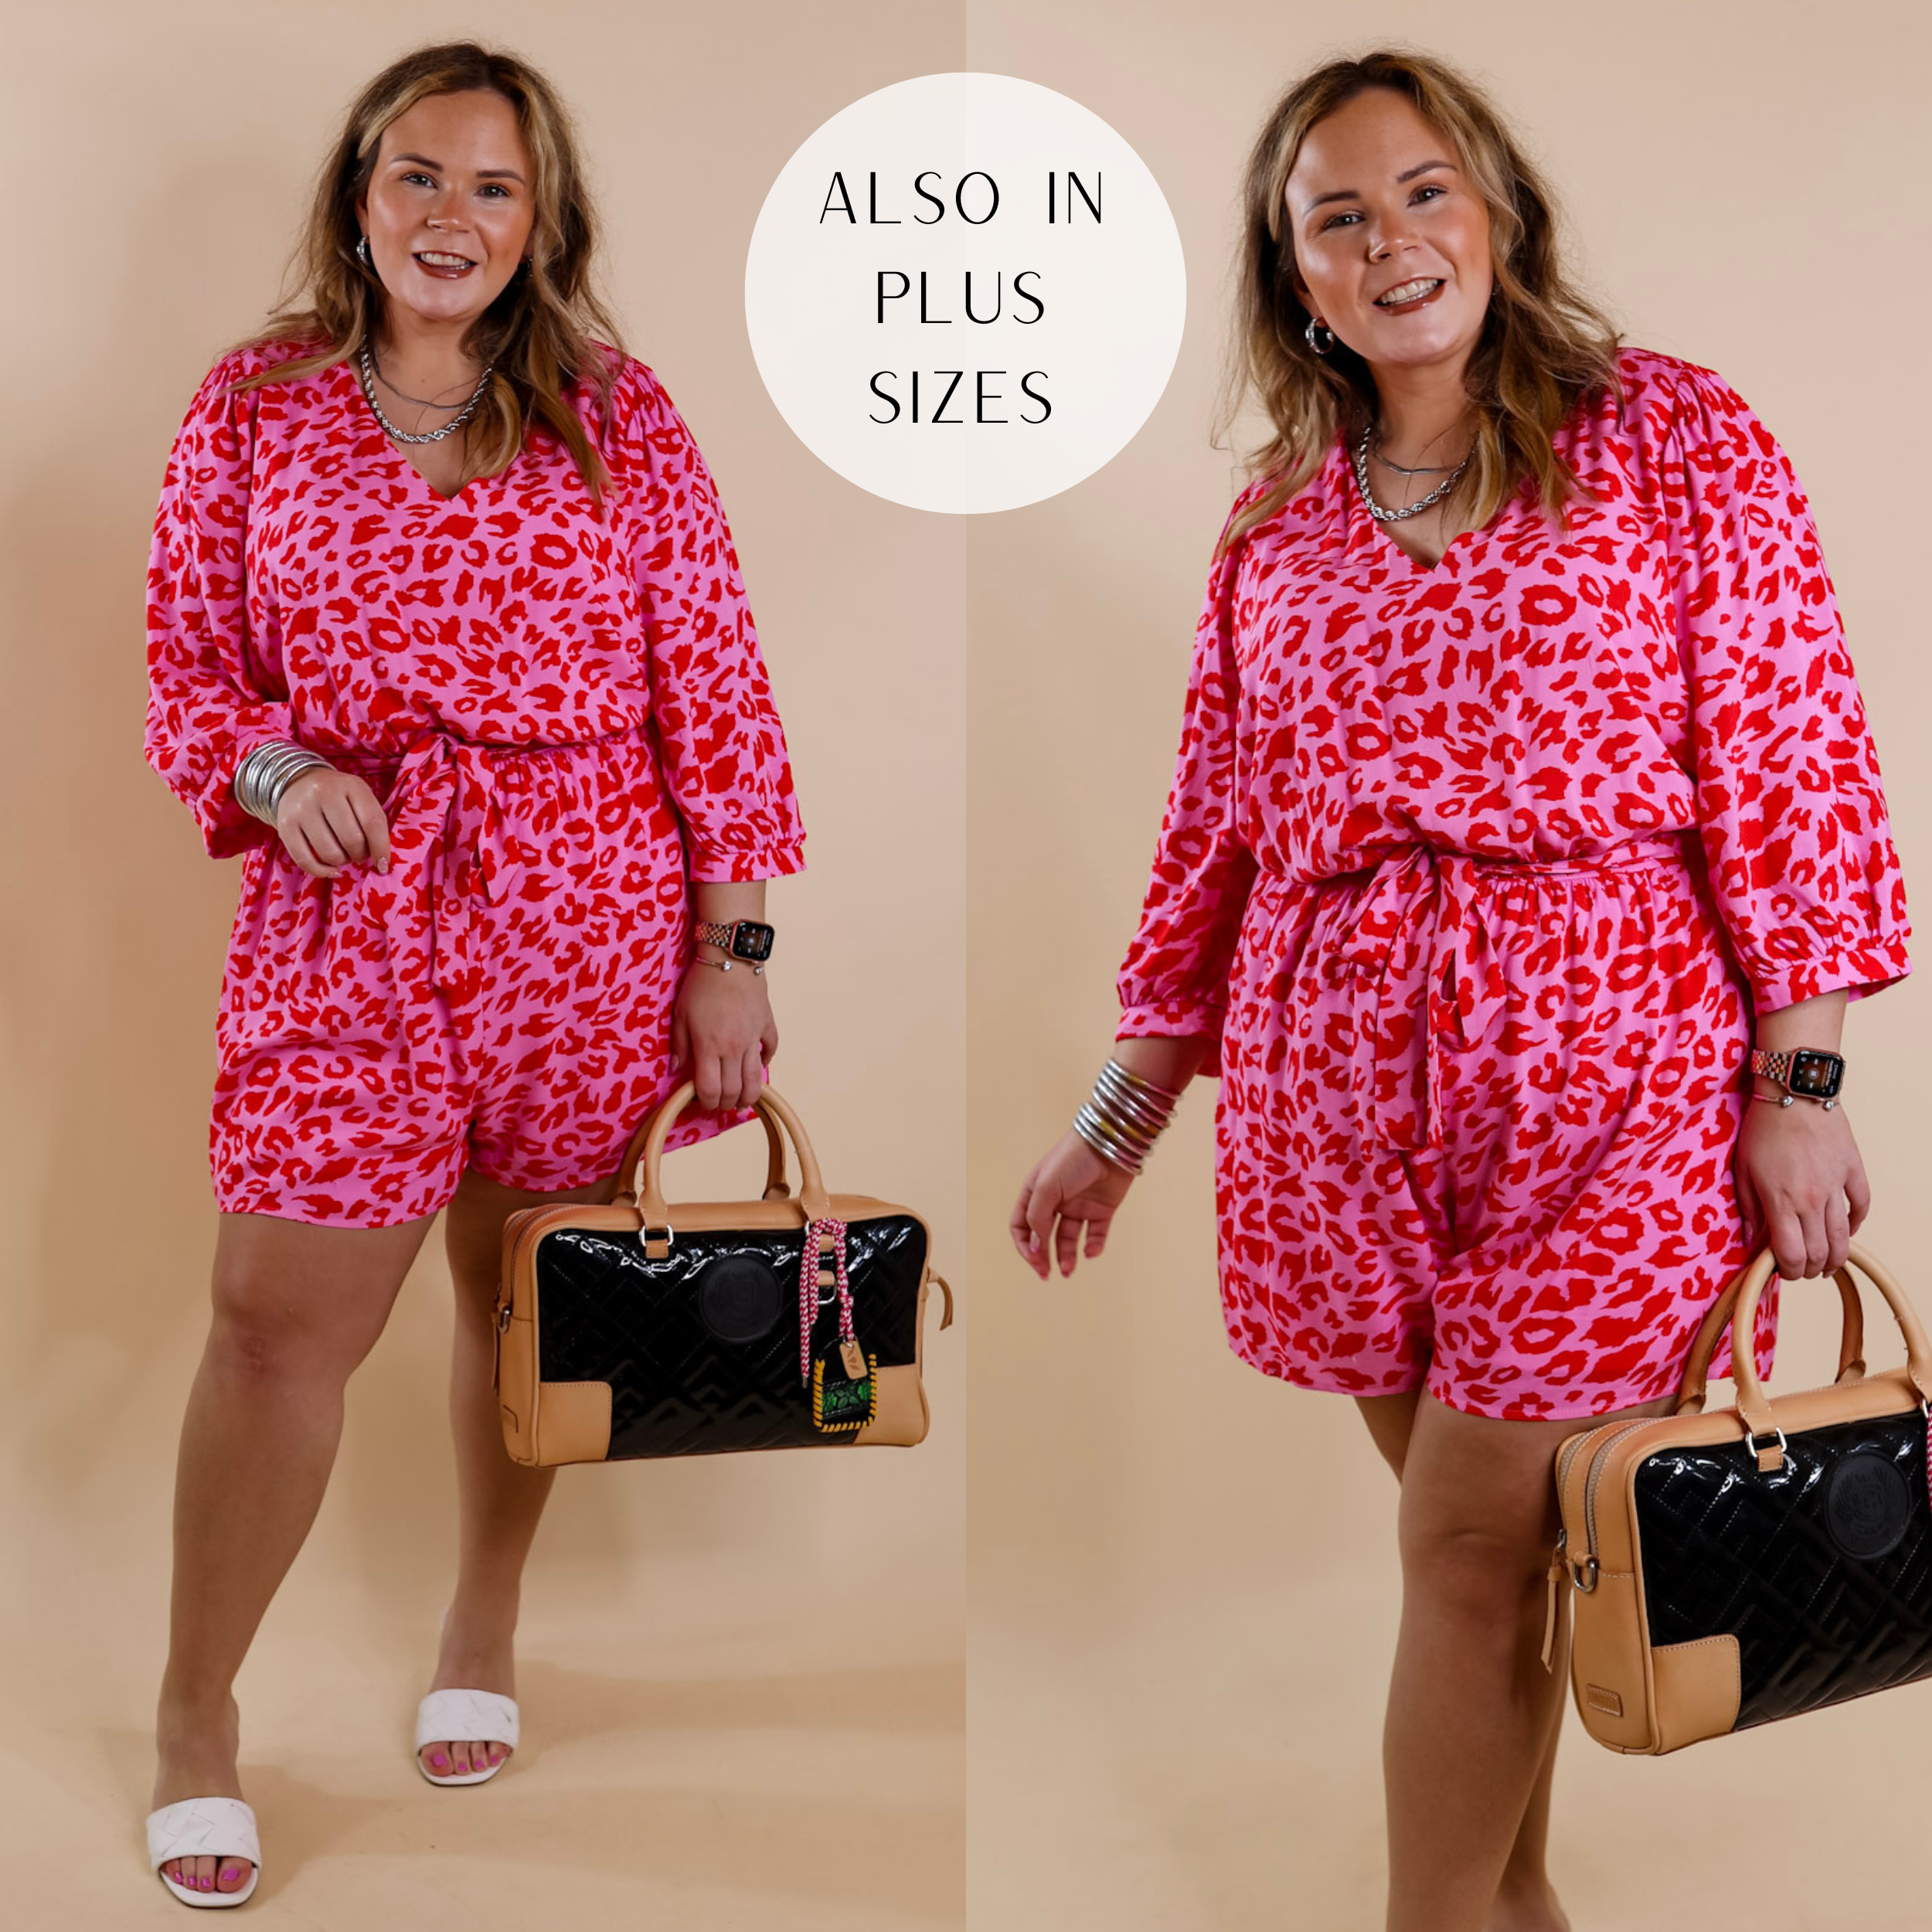 Model is wearing a pink romper with a red leopard print. This romper has a v neckline, a waist tie, and 3/4 sleeves. Model has this paired with white heels, silver jewelry, and a black Consuela purse.